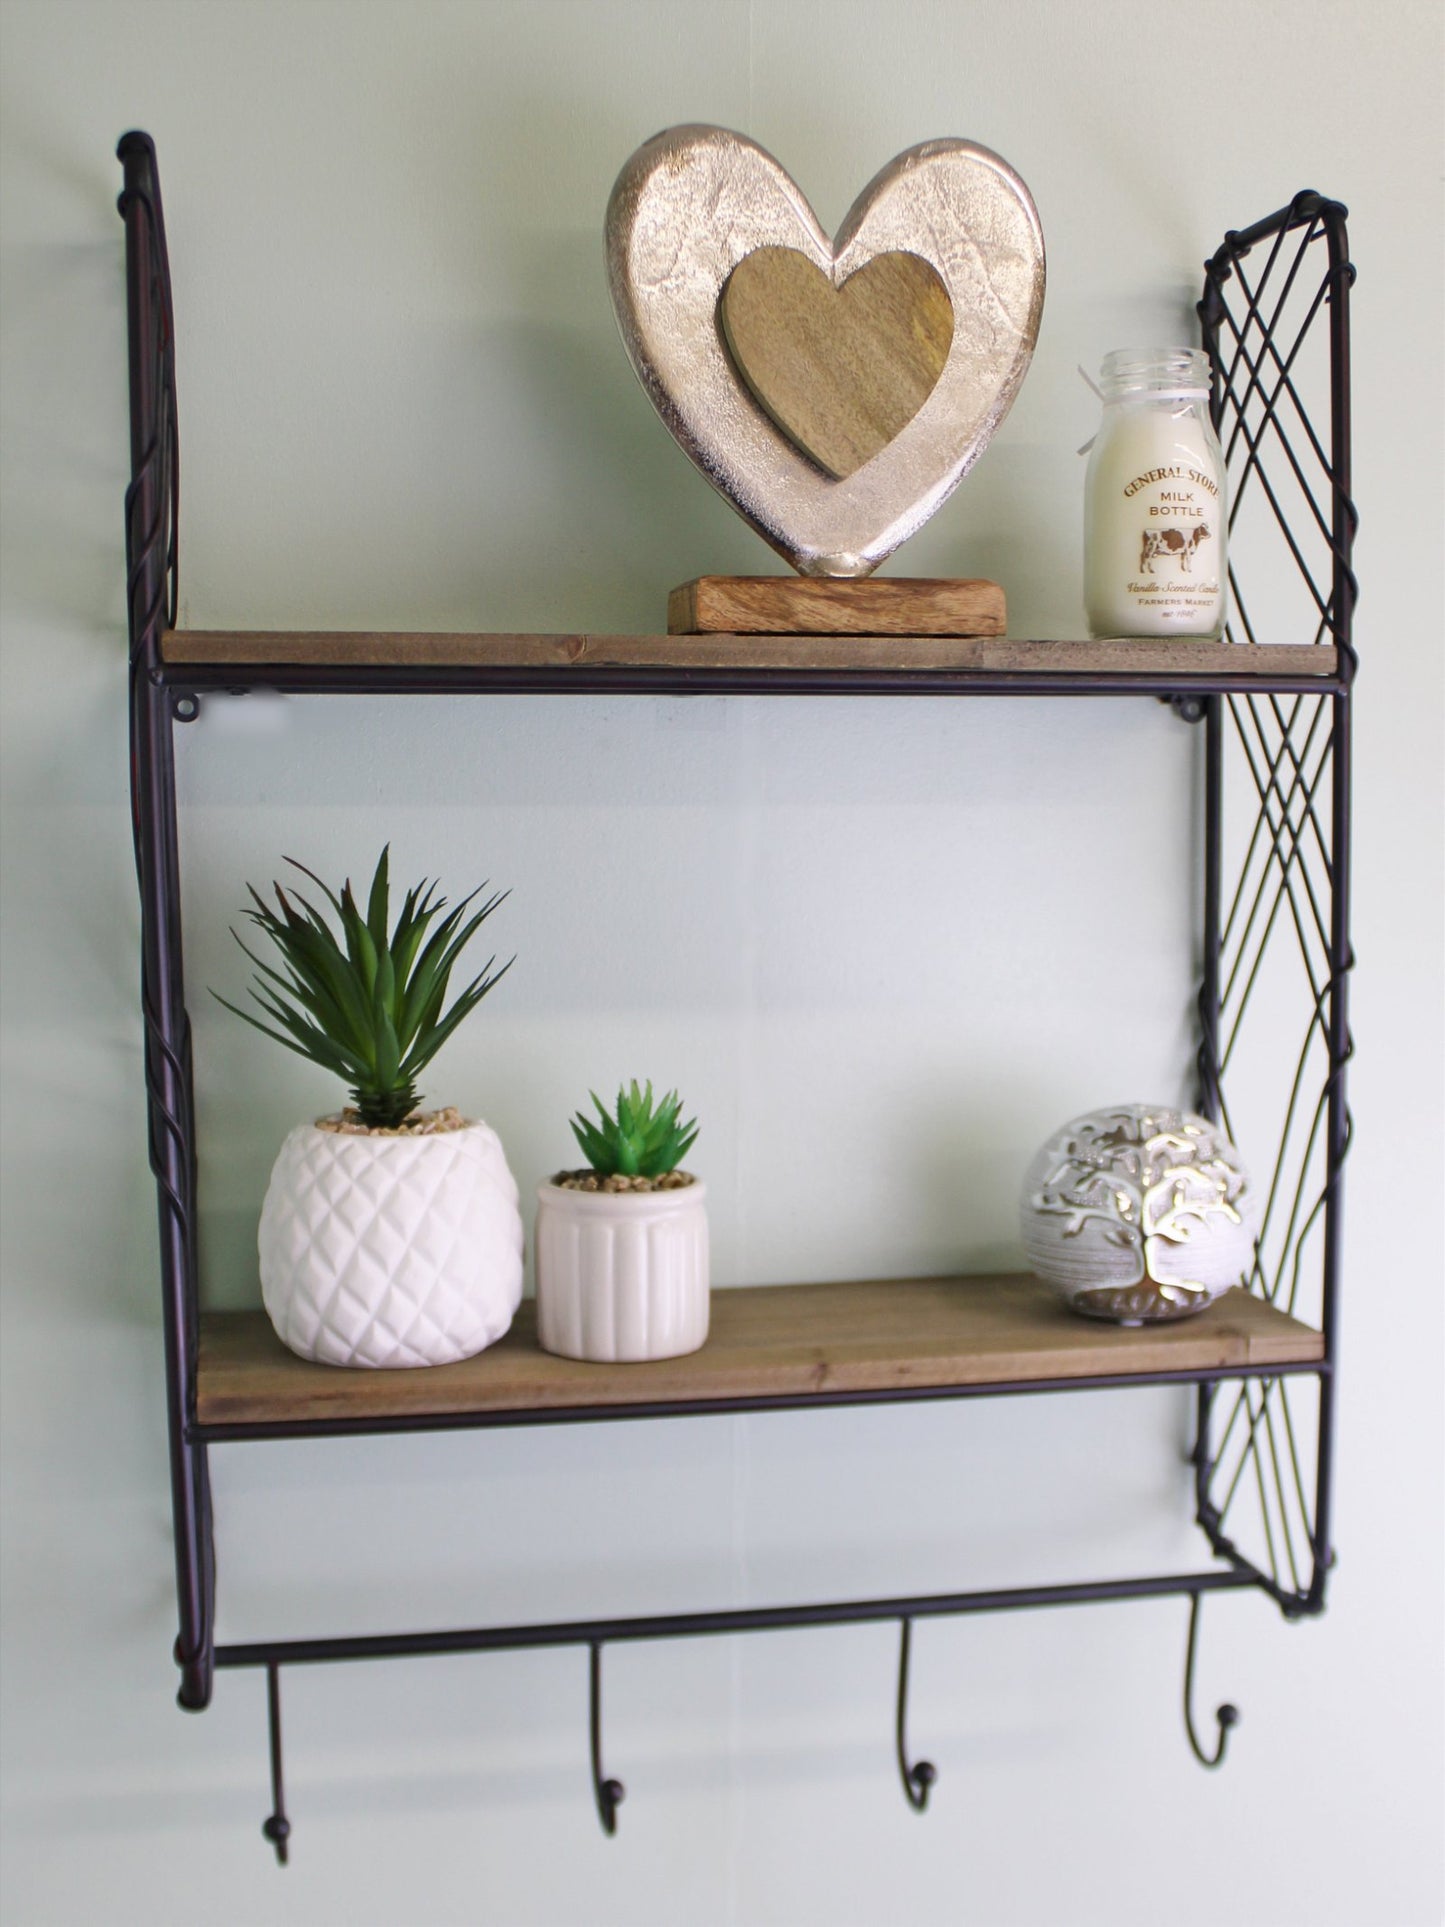 Industrial Style Wall Shelving Unit With Coat Hooks